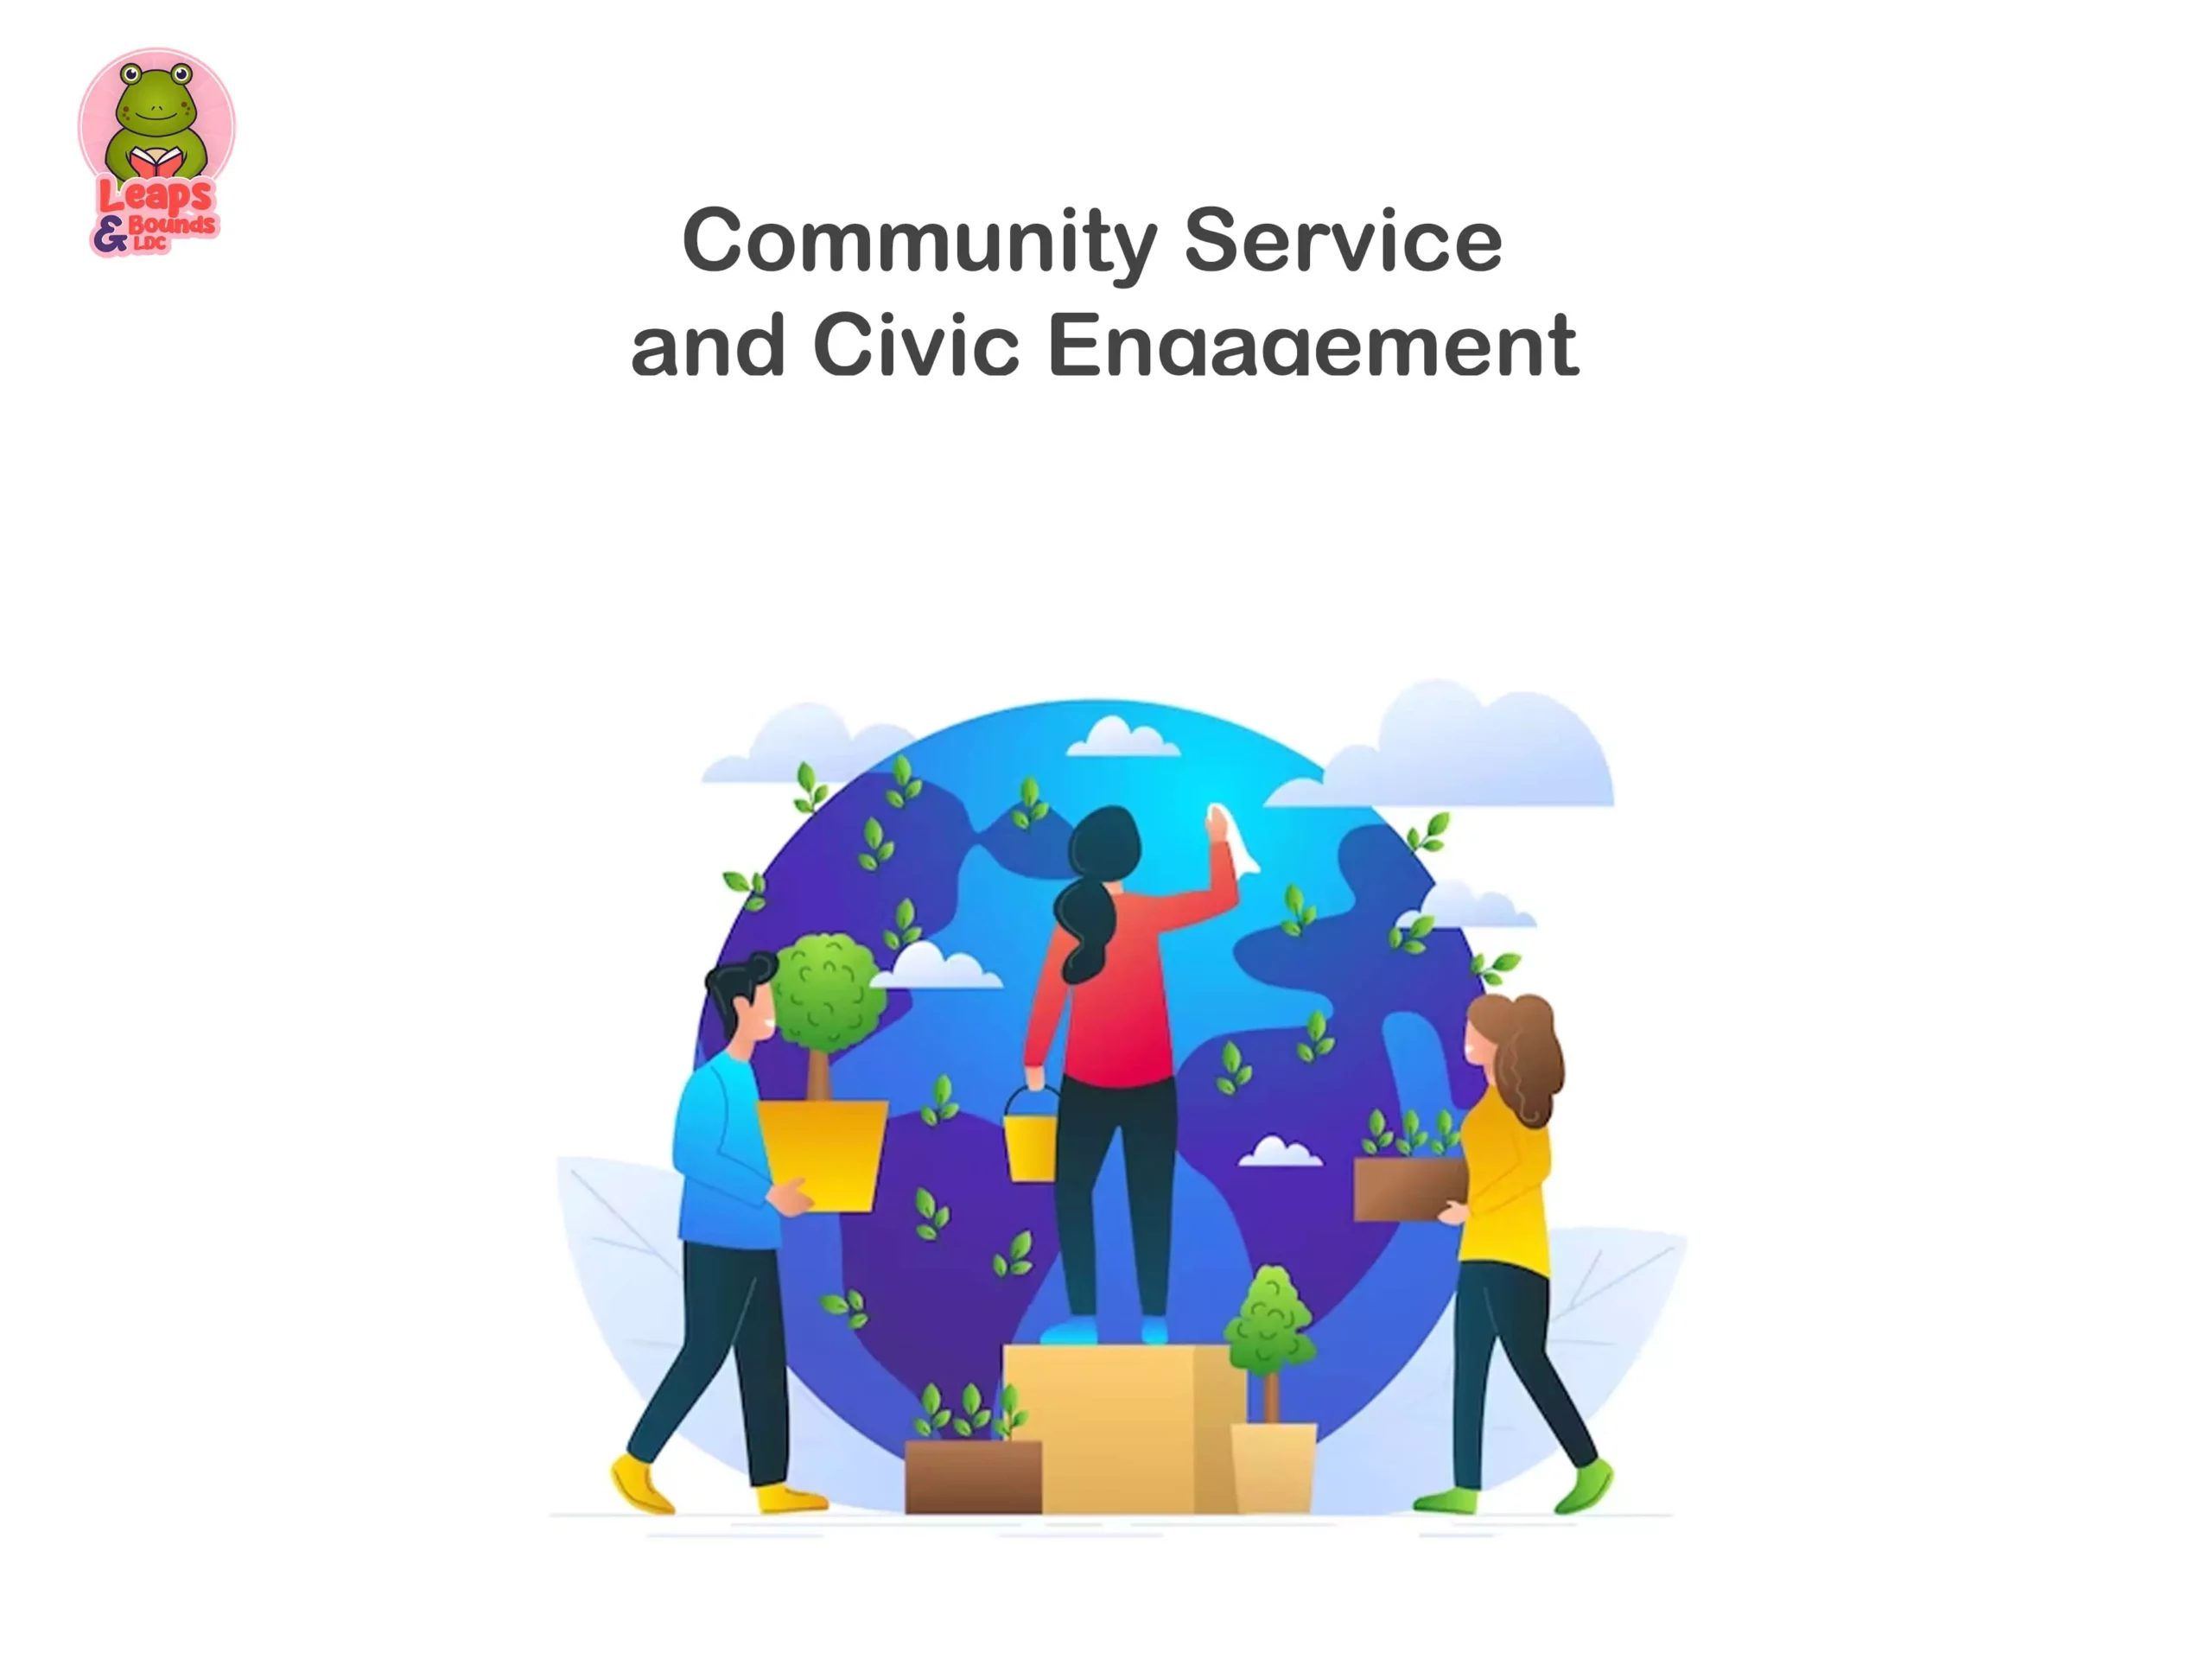 Community Service and Civic Engagement